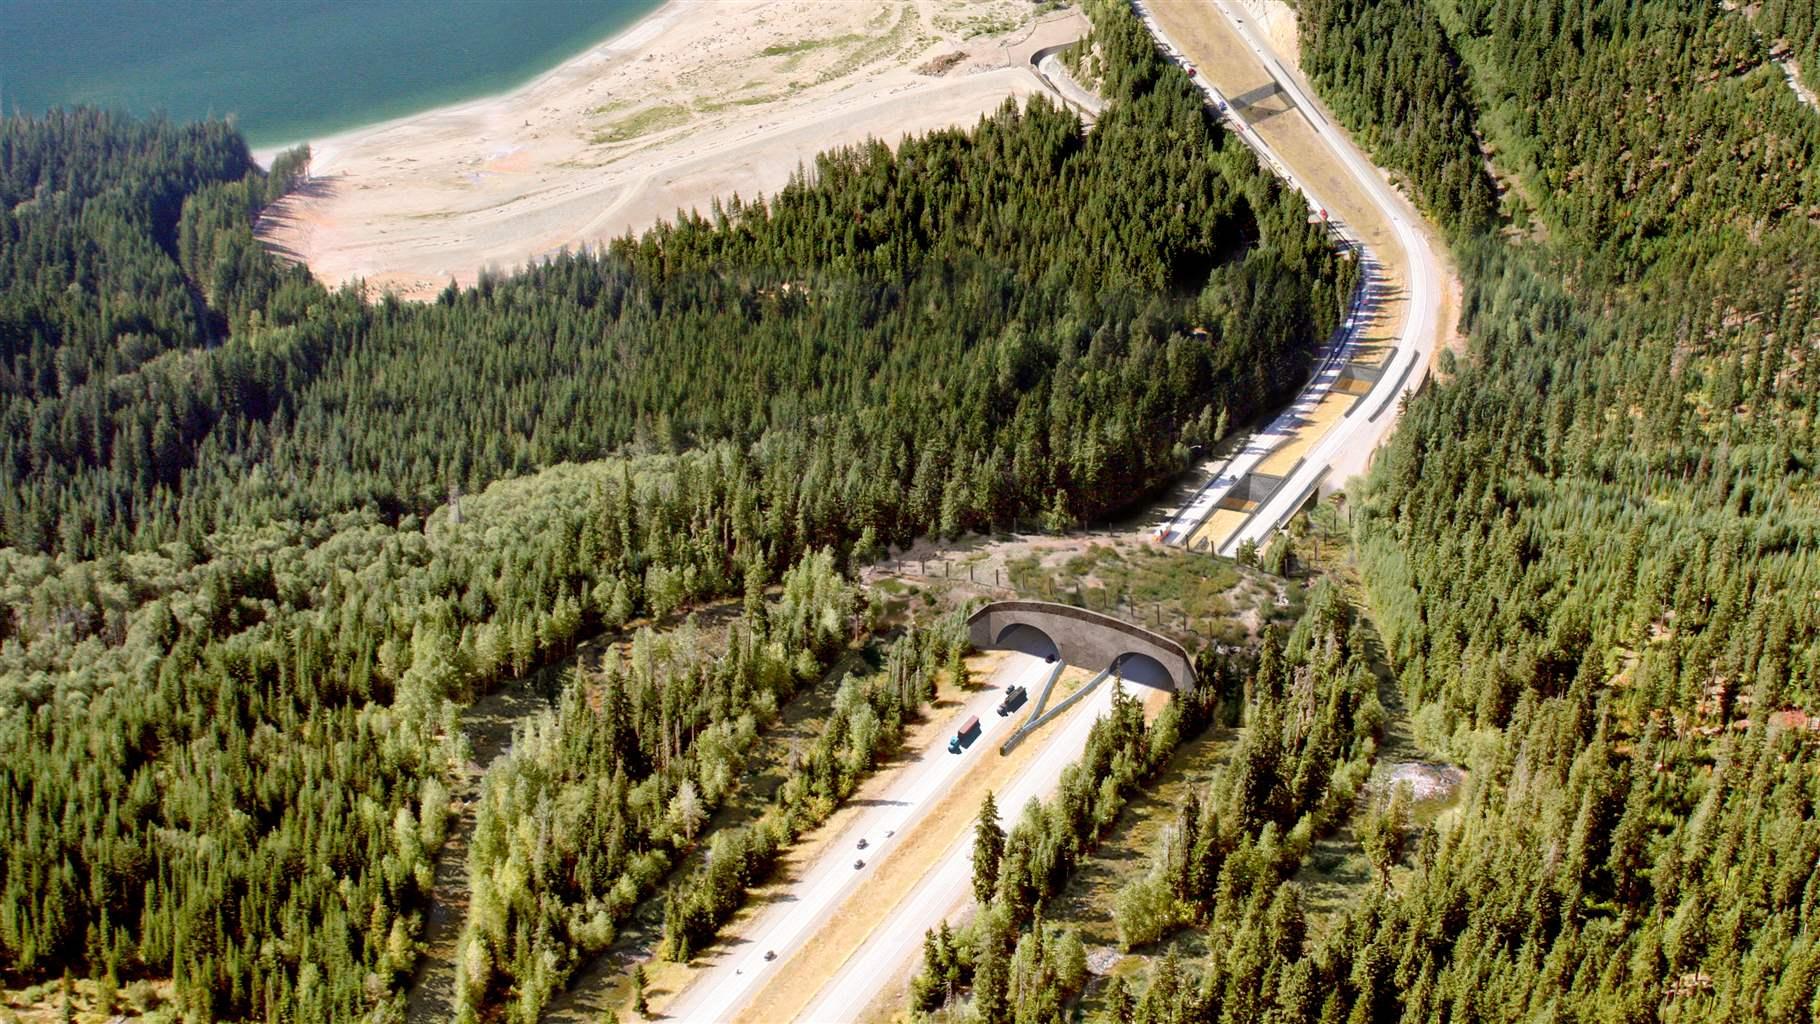 A bird’s-eye view shows a rendering of the Snoqualmie Pass wildlife overpass on I-90 in Washington, one of 27 structures that, when completed in 2029, will connect terrestrial and aquatic habitats along one of the busiest corridors in the Pacific Northwest.